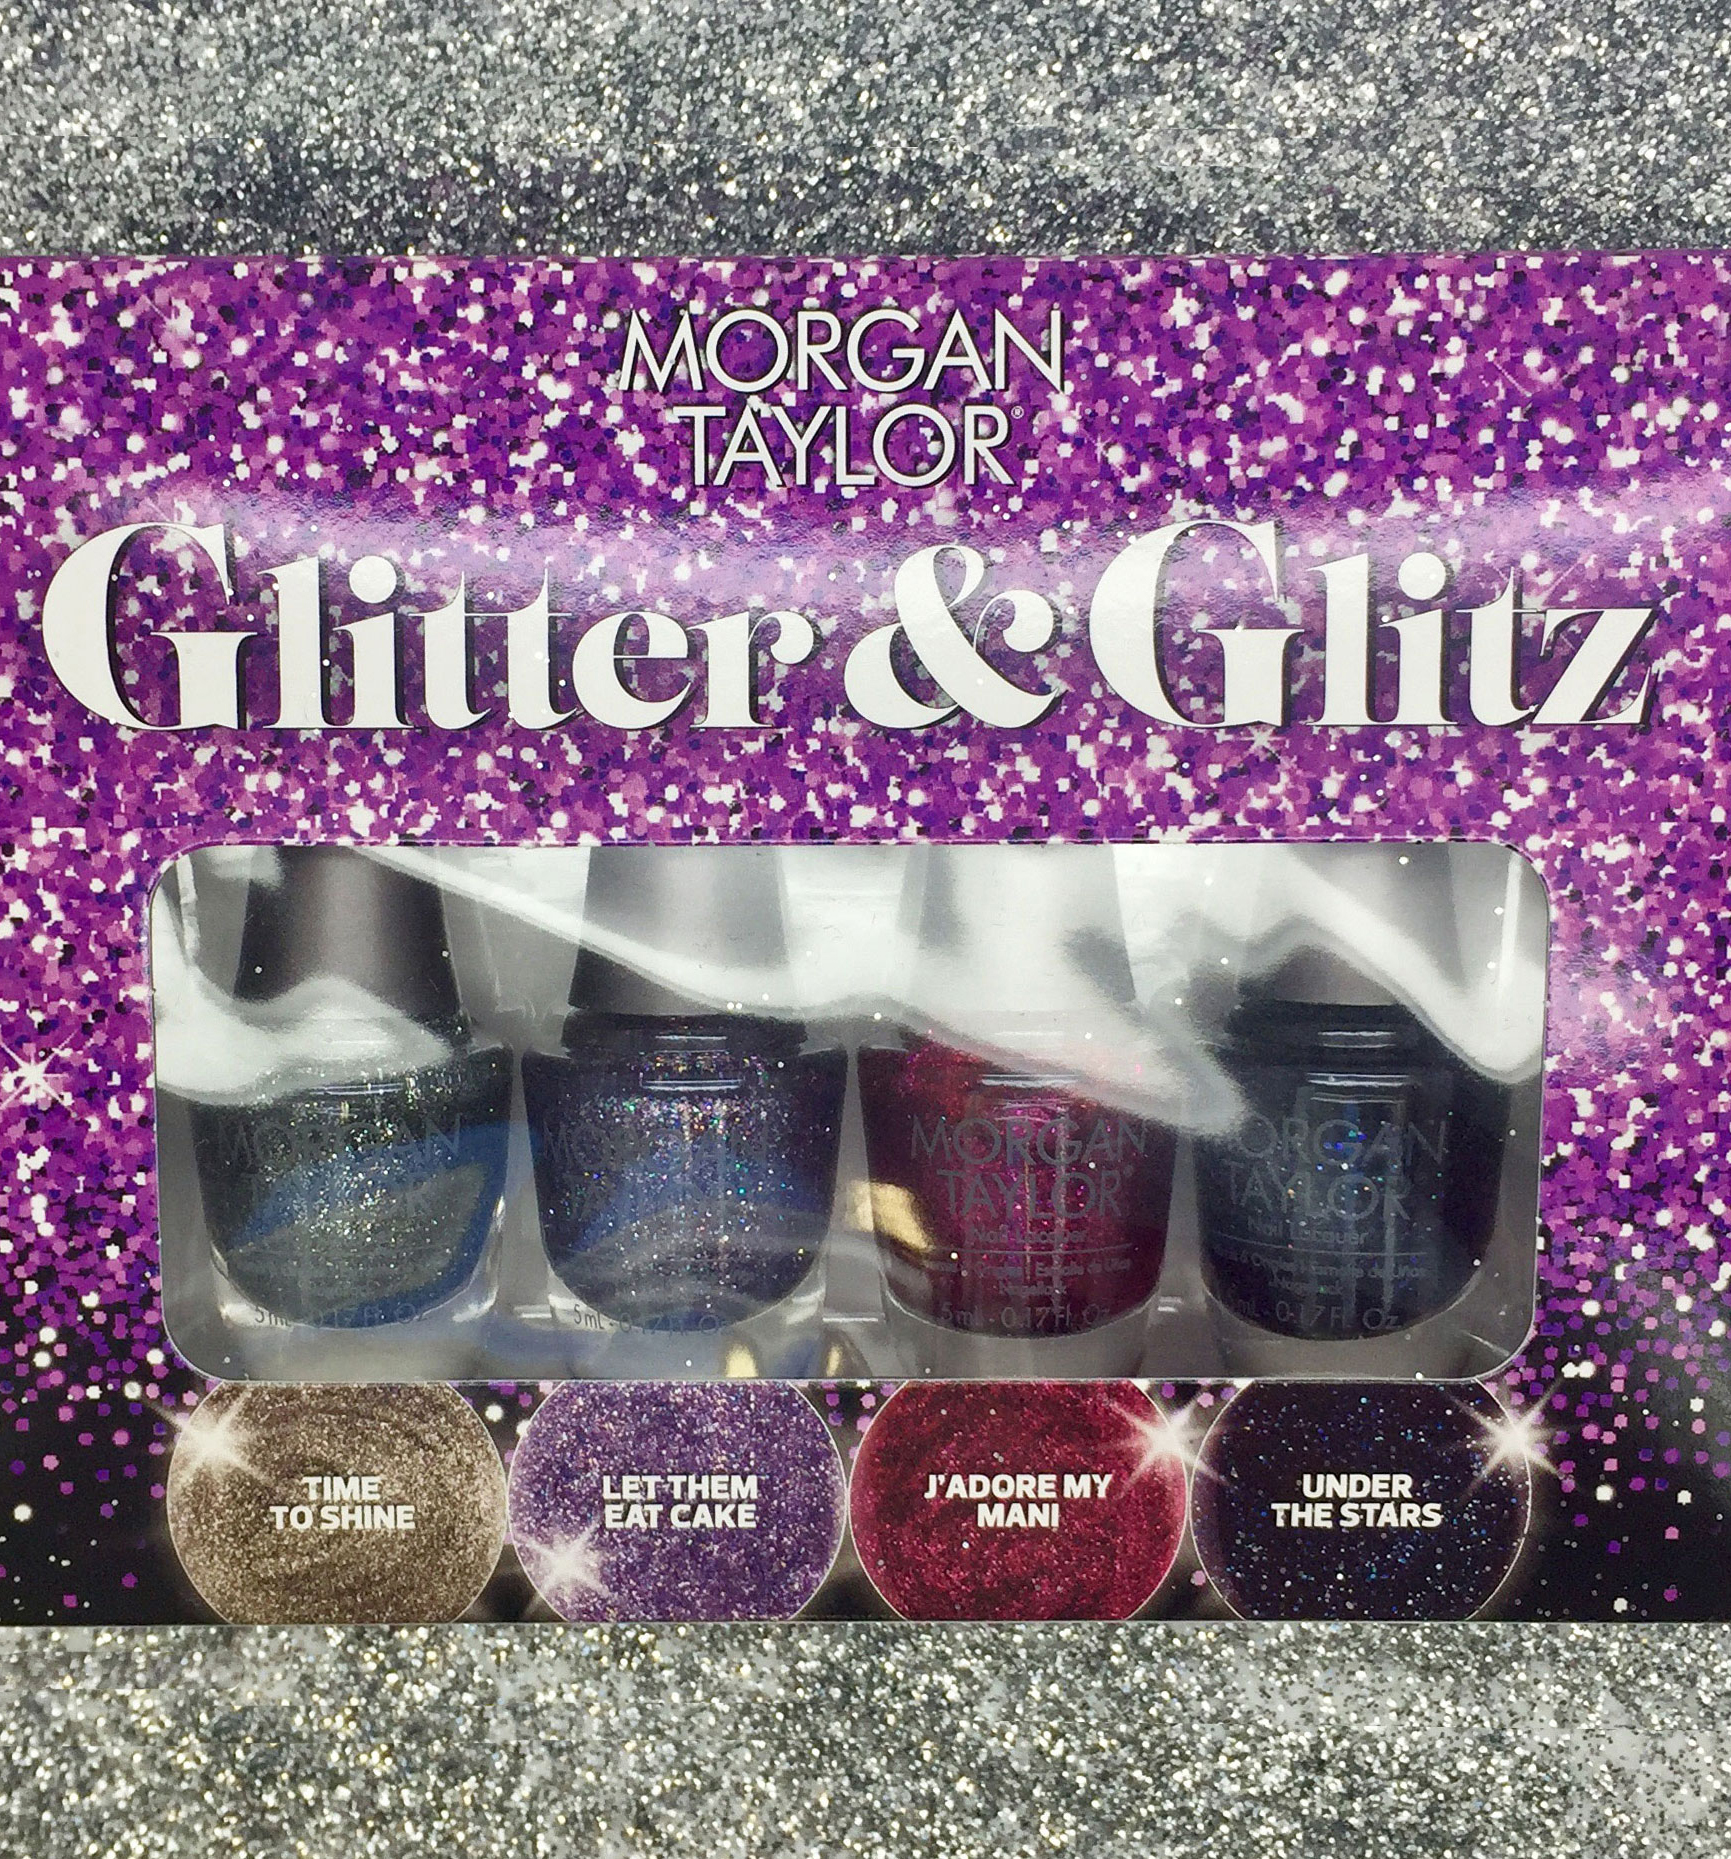 Give The Gift Of Glamour This Christmas With Morgan Taylor’s Gift Sets!